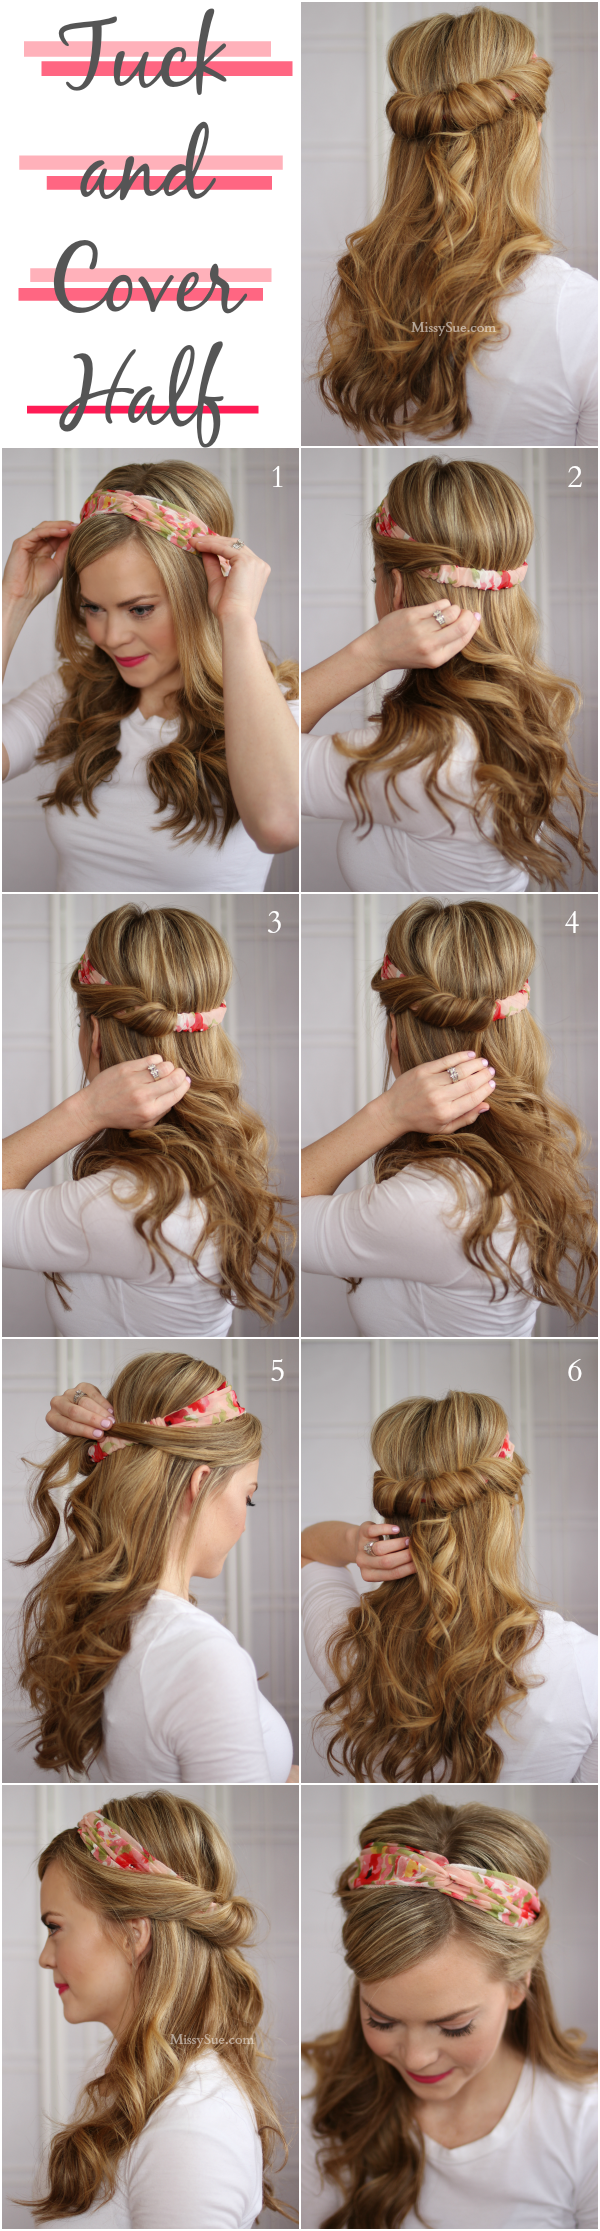 Tuck and Cover Half up hairstyle, the perfect way to your favorite headband!:: P